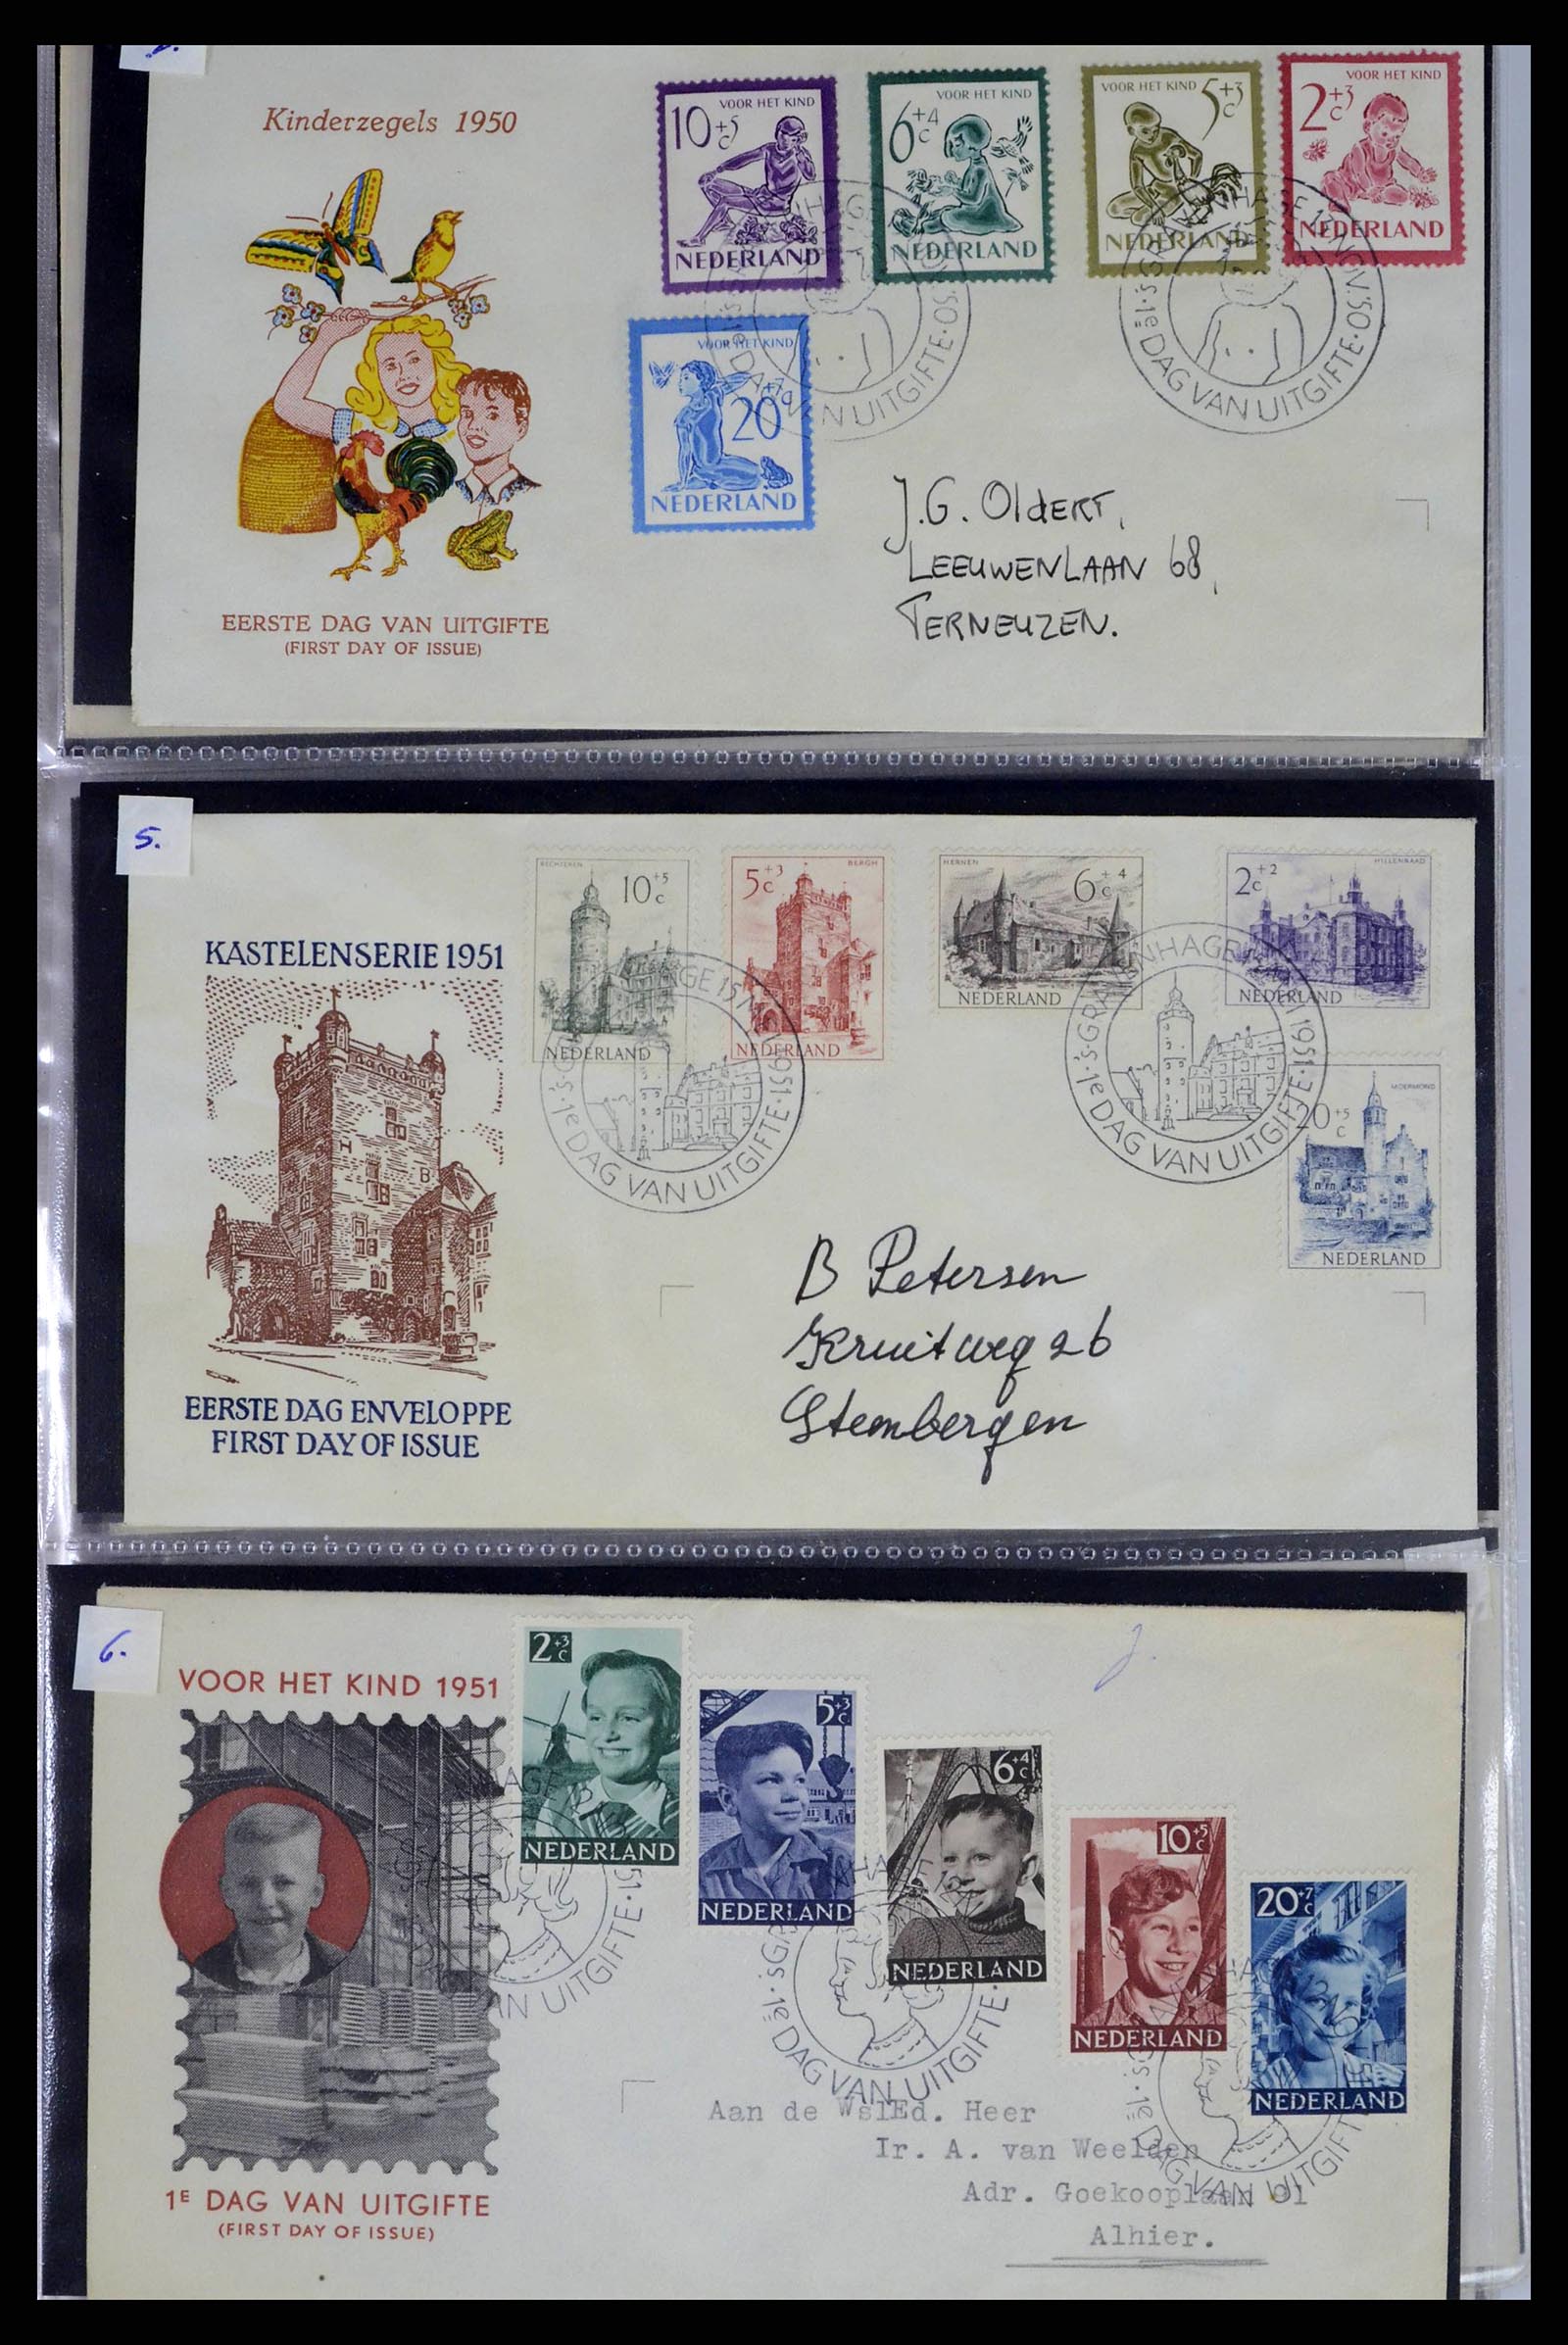 38271 0002 - Stamp collection 38271 Netherlands FDC's 1950-1995.